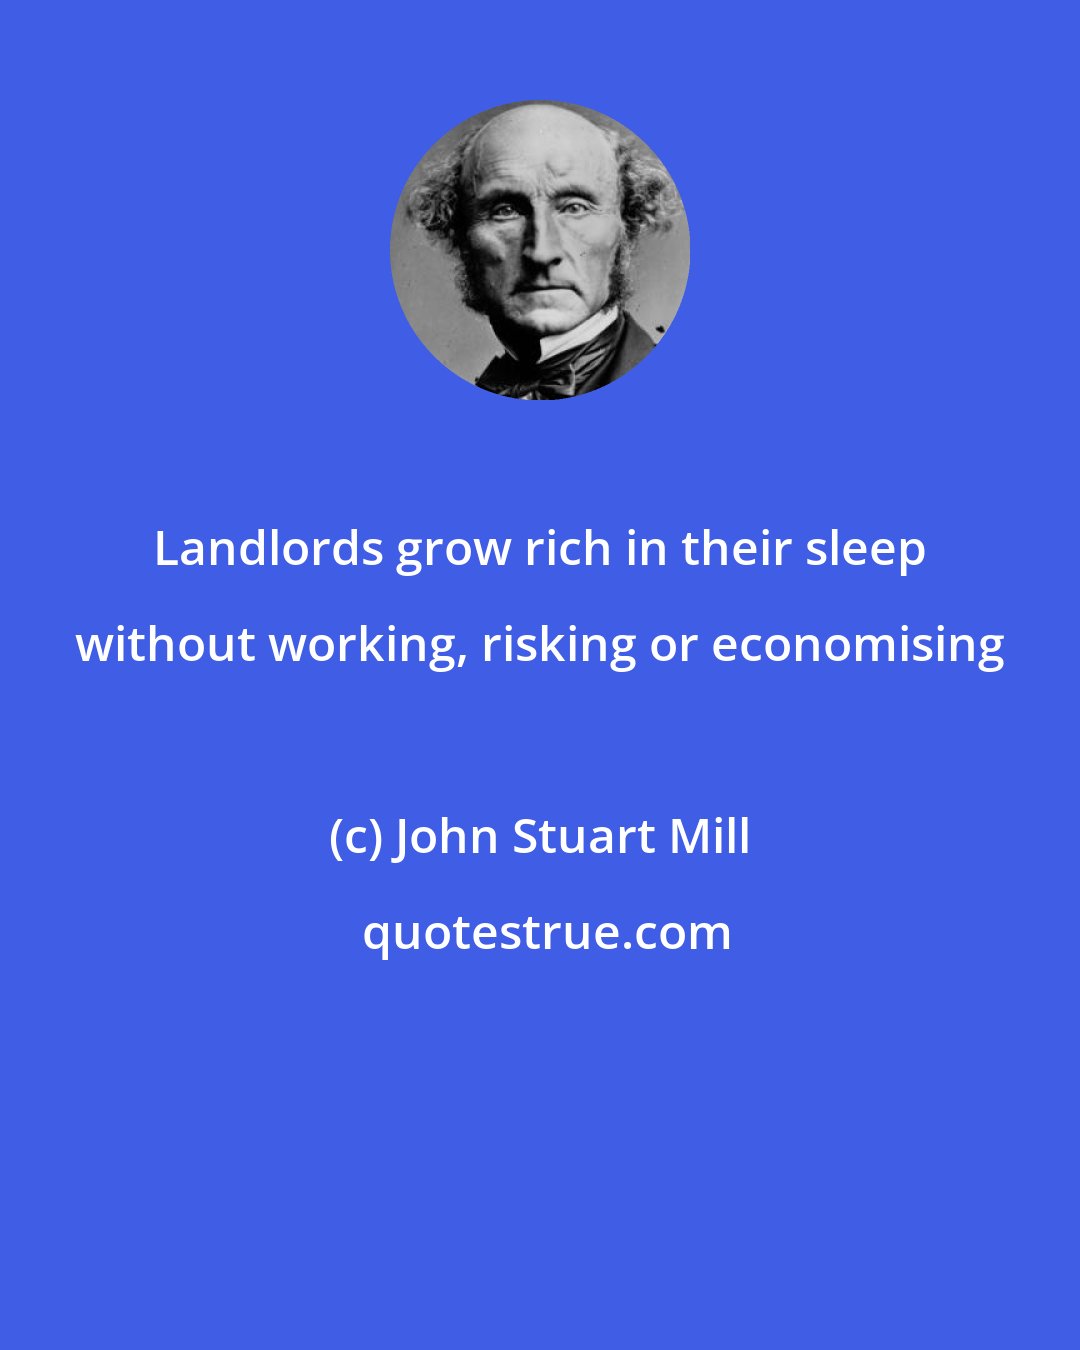 John Stuart Mill: Landlords grow rich in their sleep without working, risking or economising